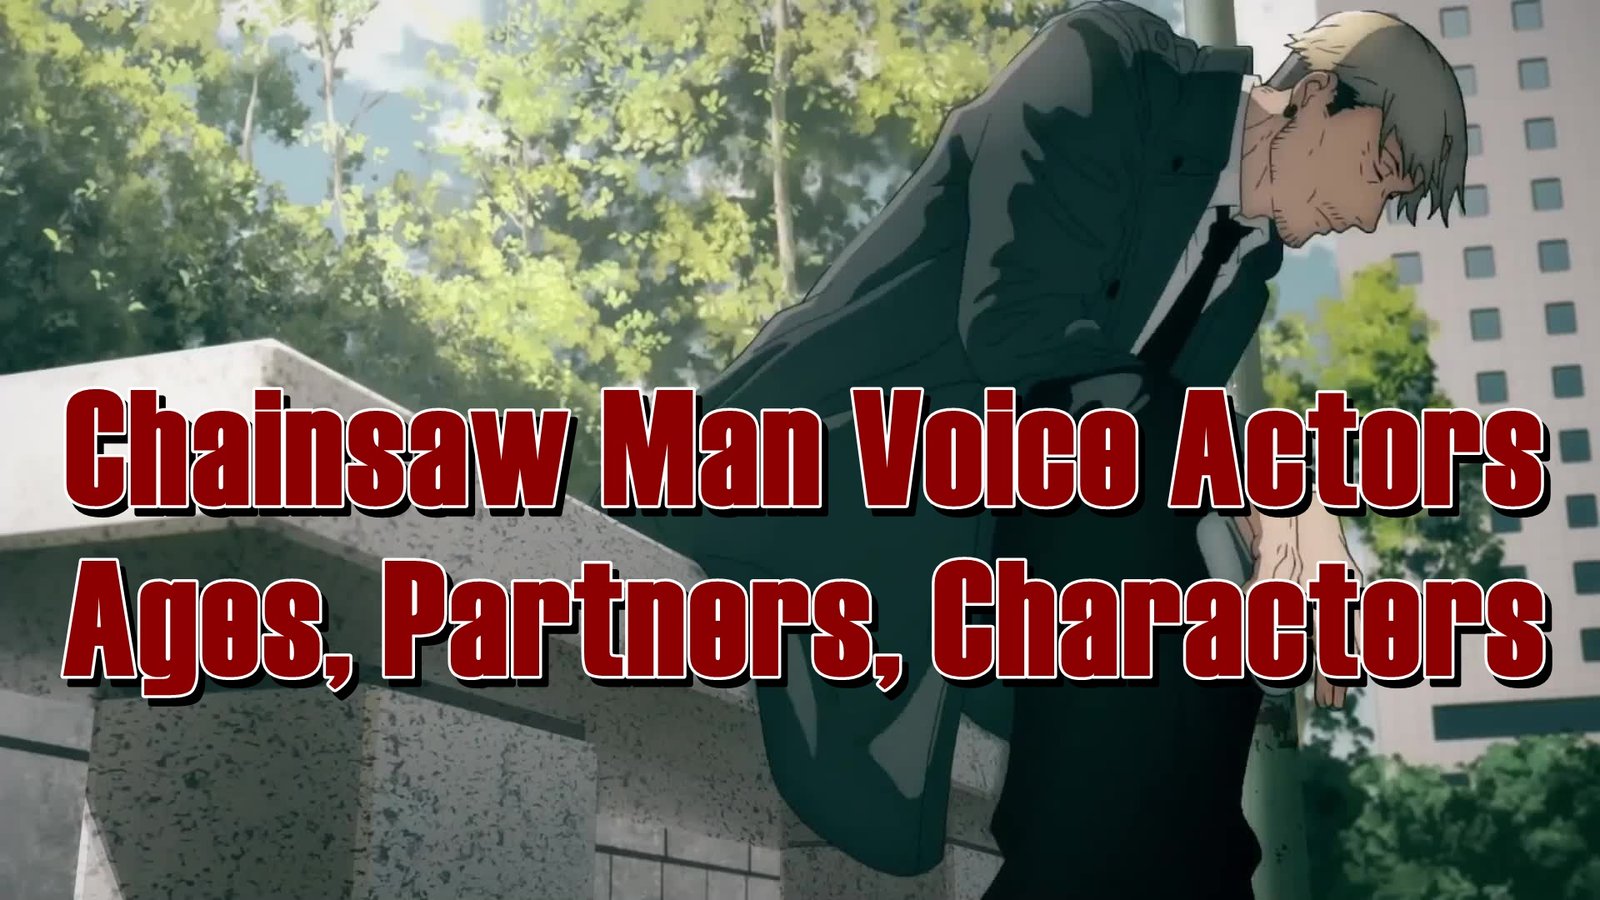 Chainsaw Man Voice Actors - Ages, Partners, Characters